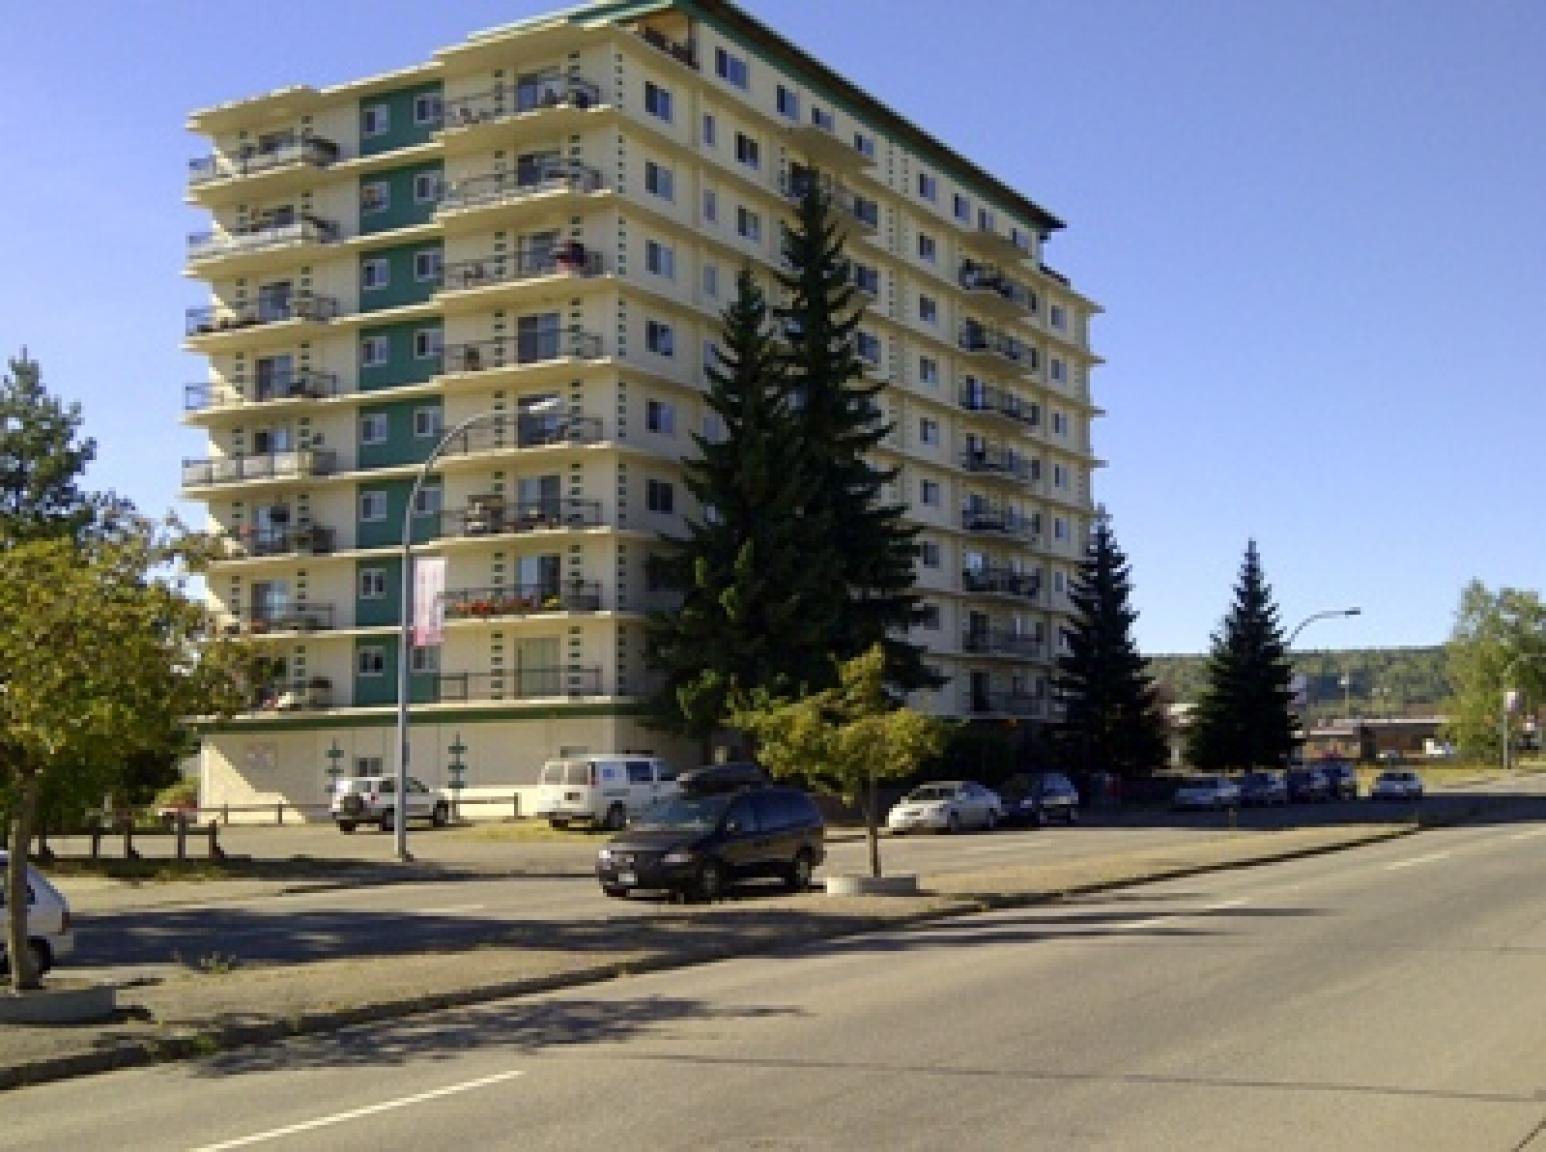 Creative Apartment Buildings In Prince George Bc With Luxury Interior